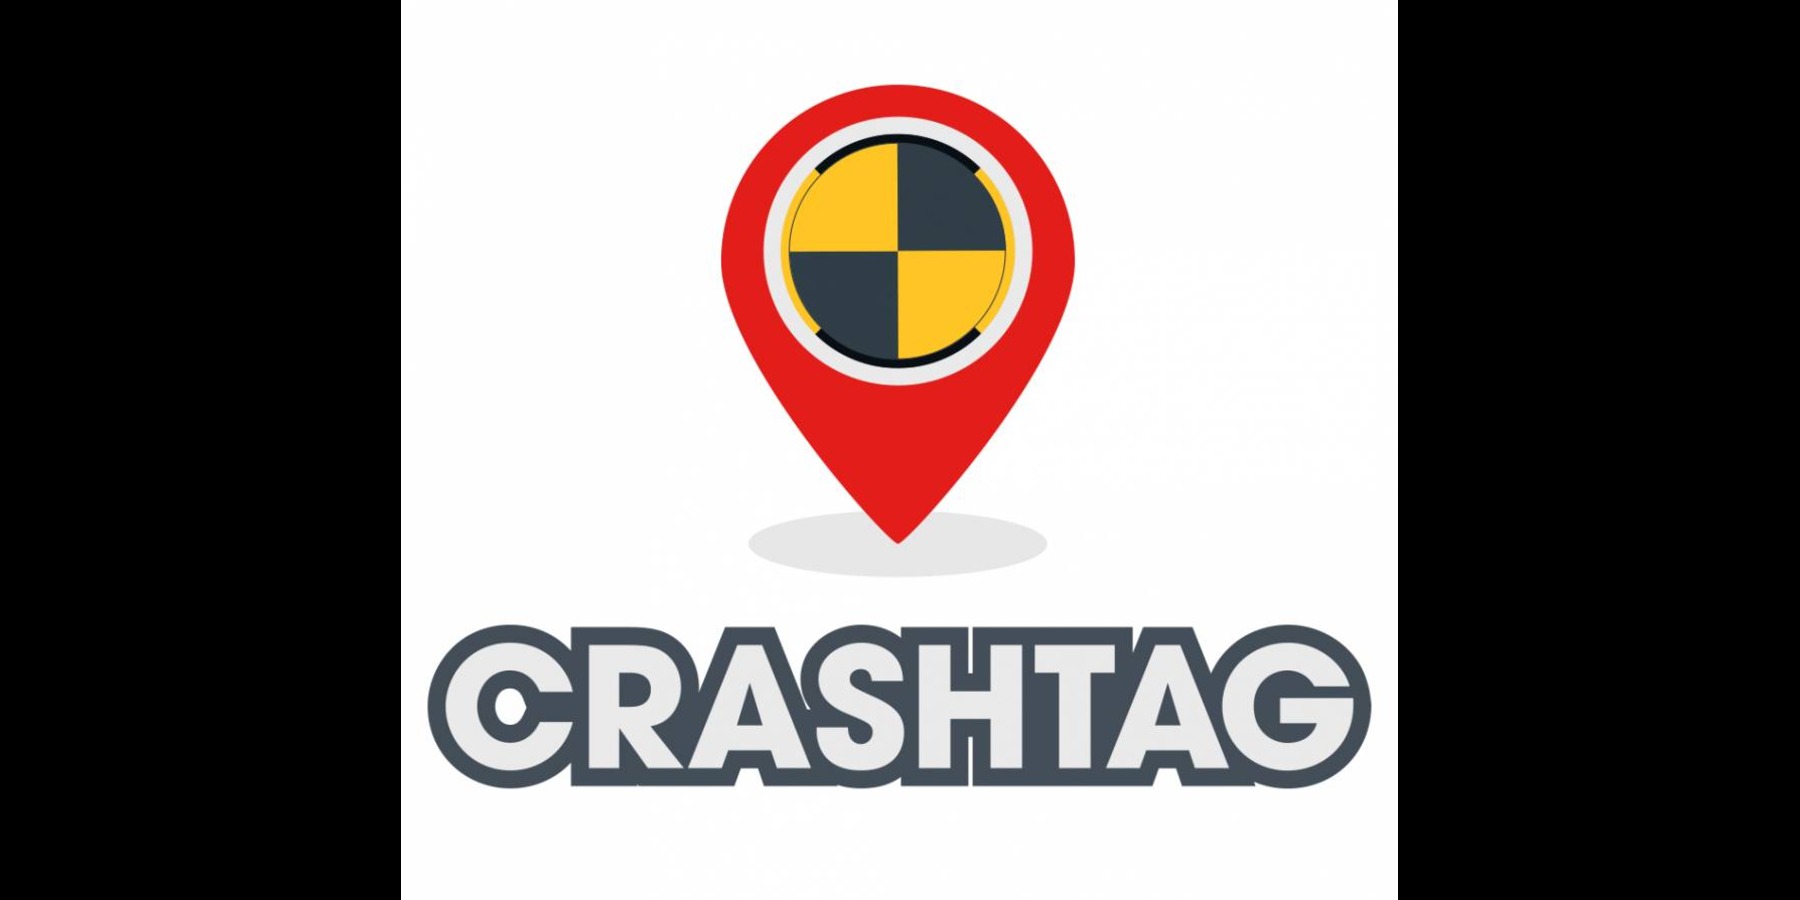 Blog hero image for the post titled: Crashtag is now live in Australia